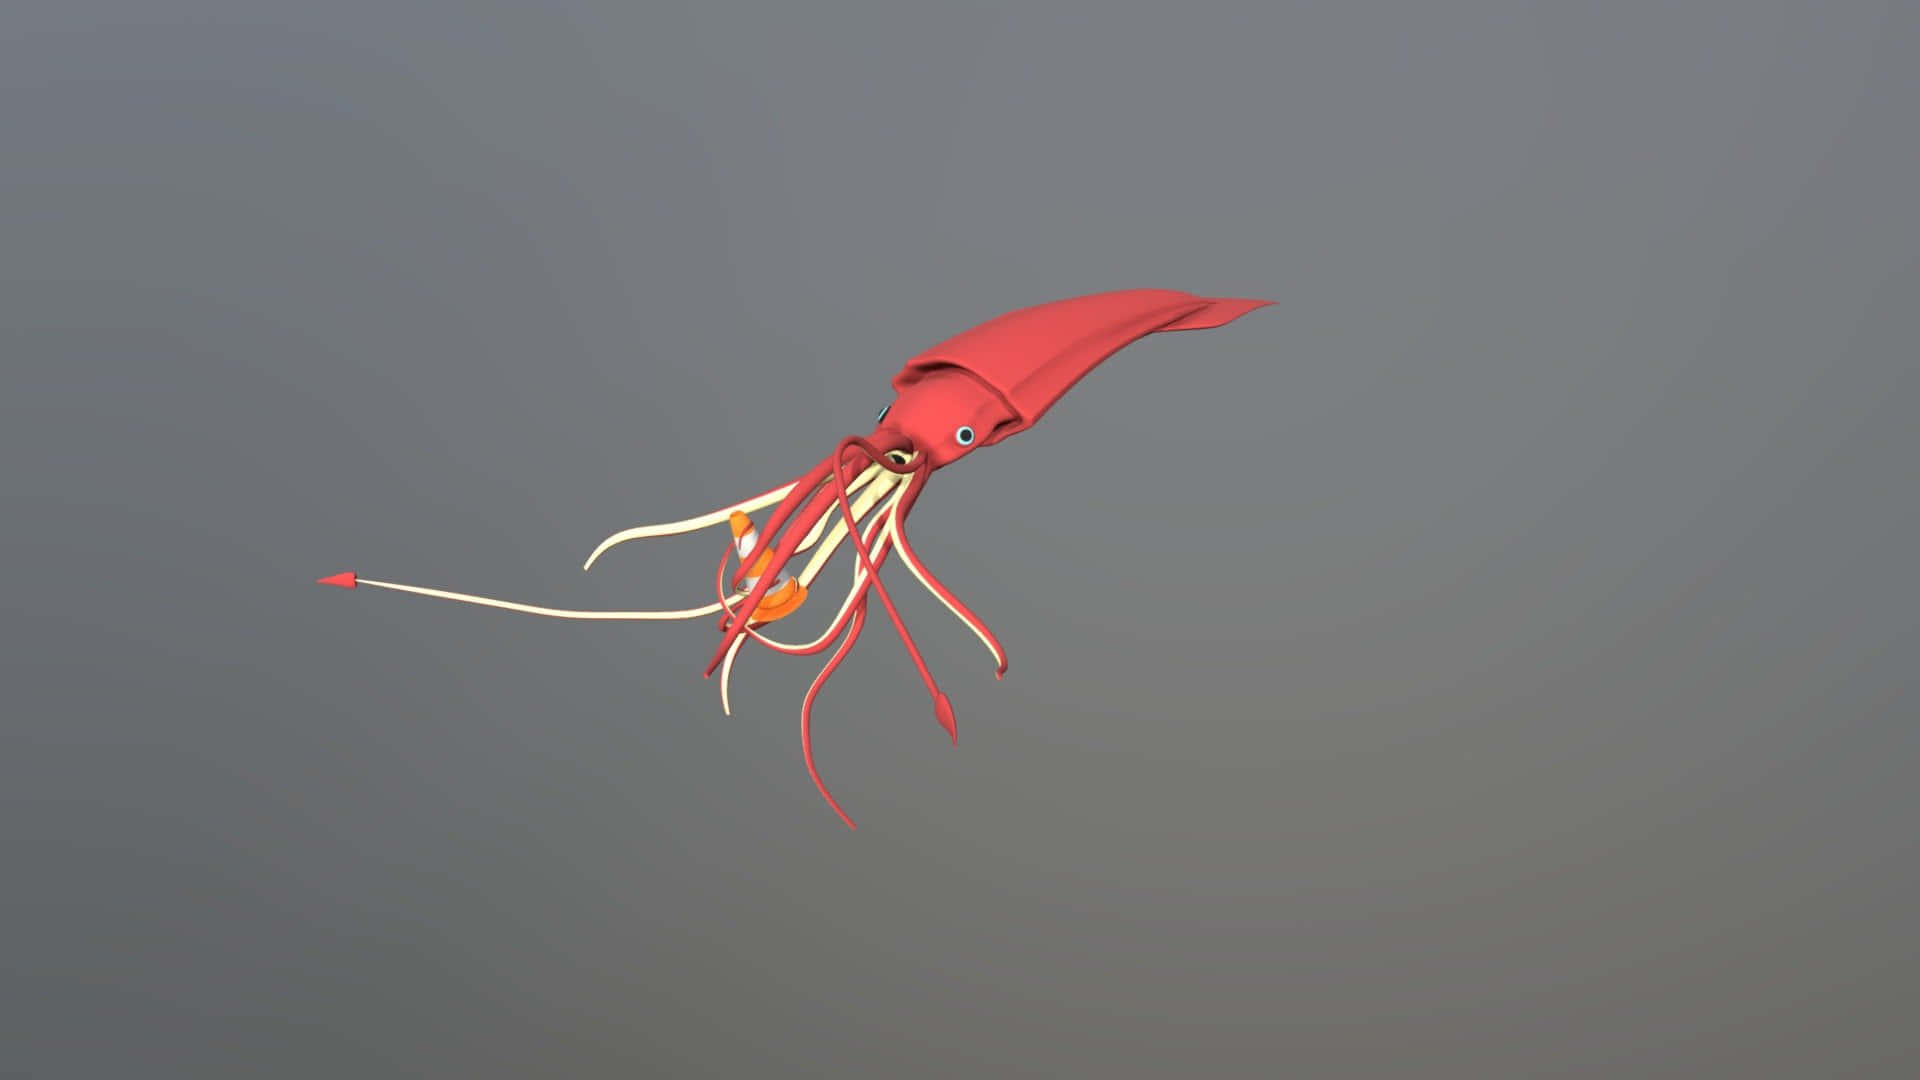 A Red Squid Flying In The Air